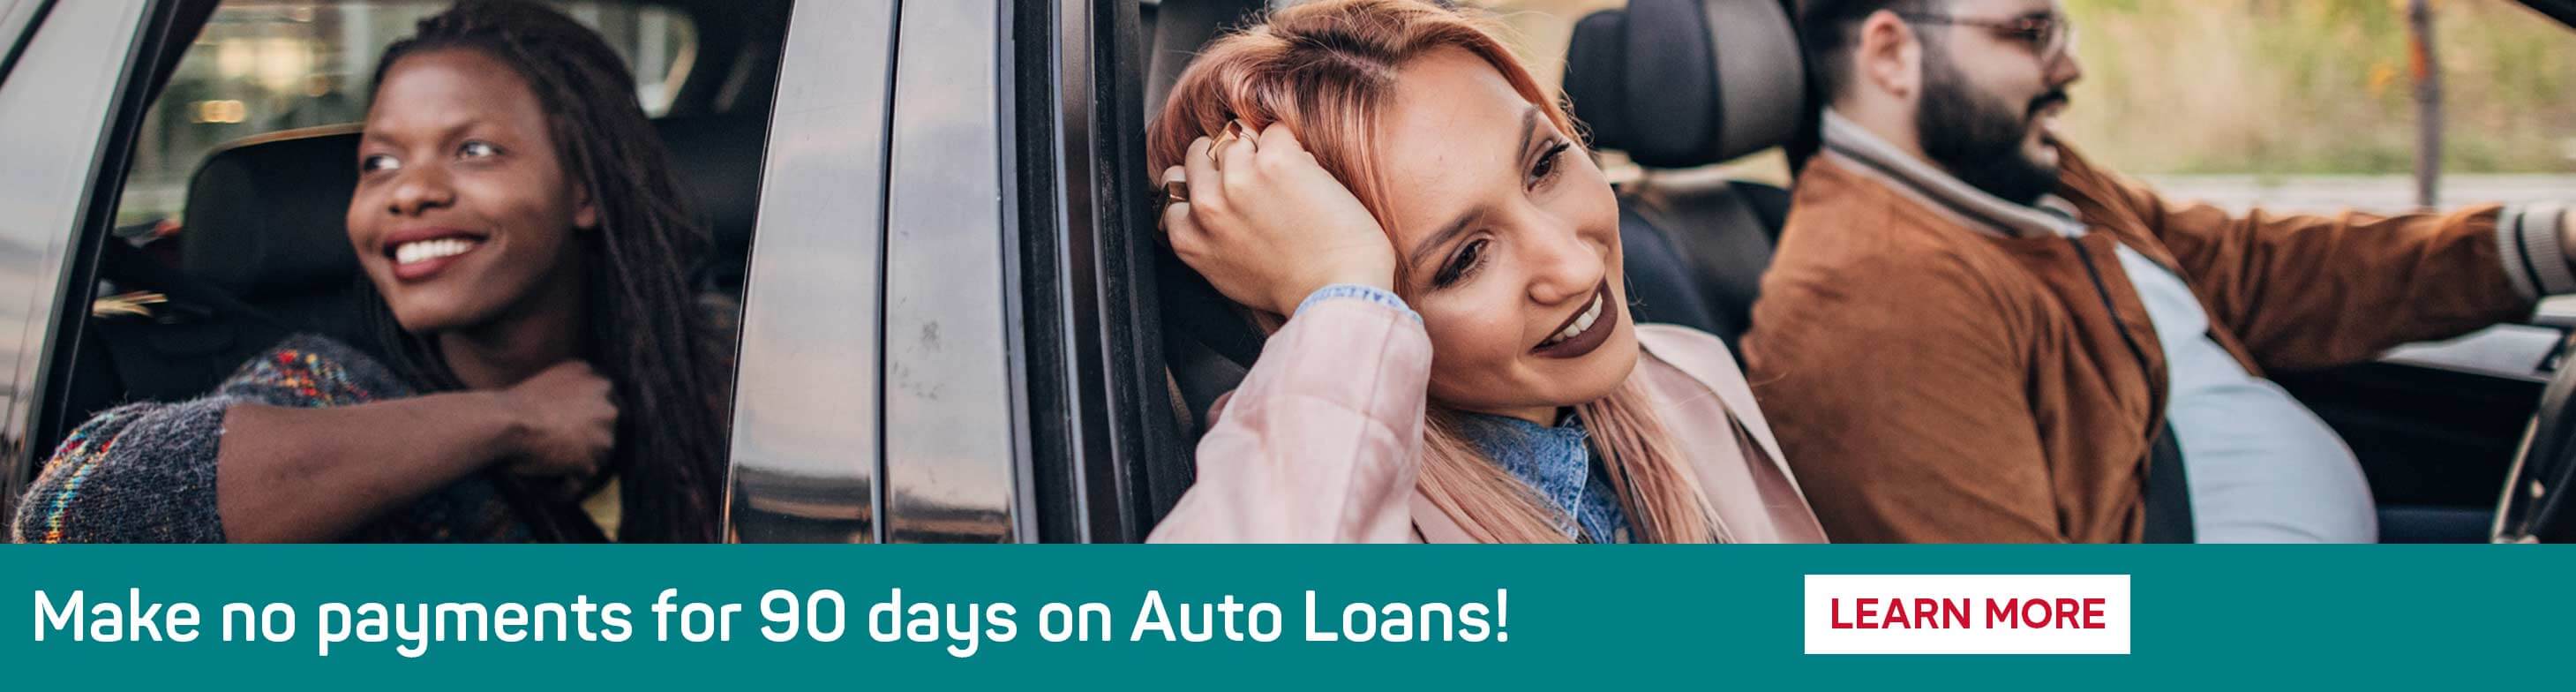 Make no payments for 90 days on Auto Loans!